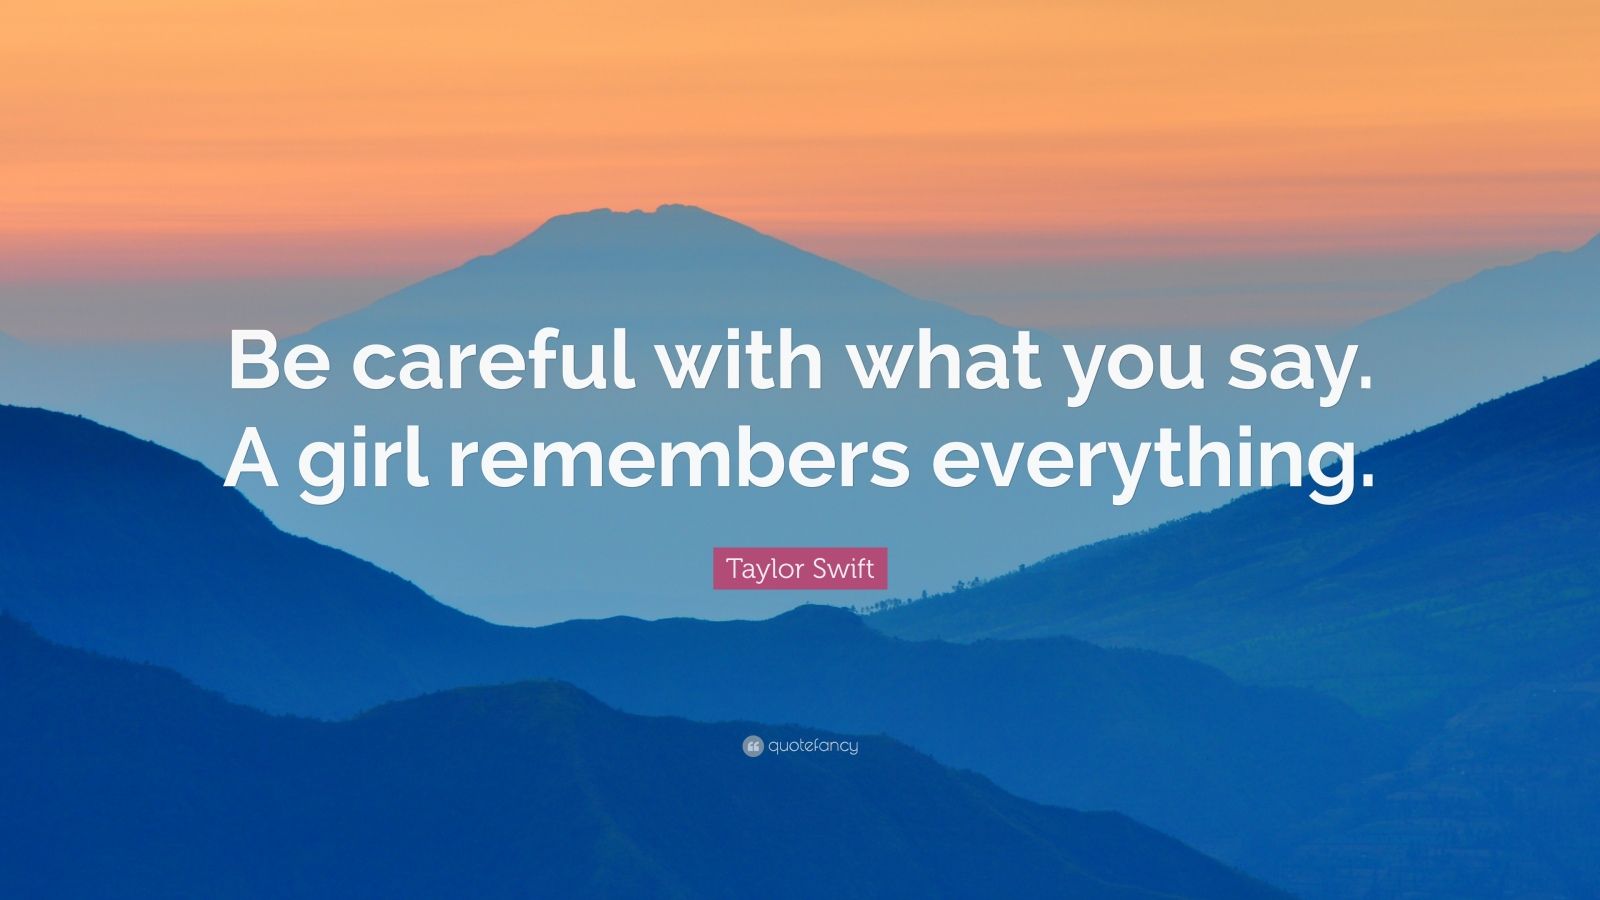 Taylor Swift Quote: “Be careful with what you say. A girl remembers ...